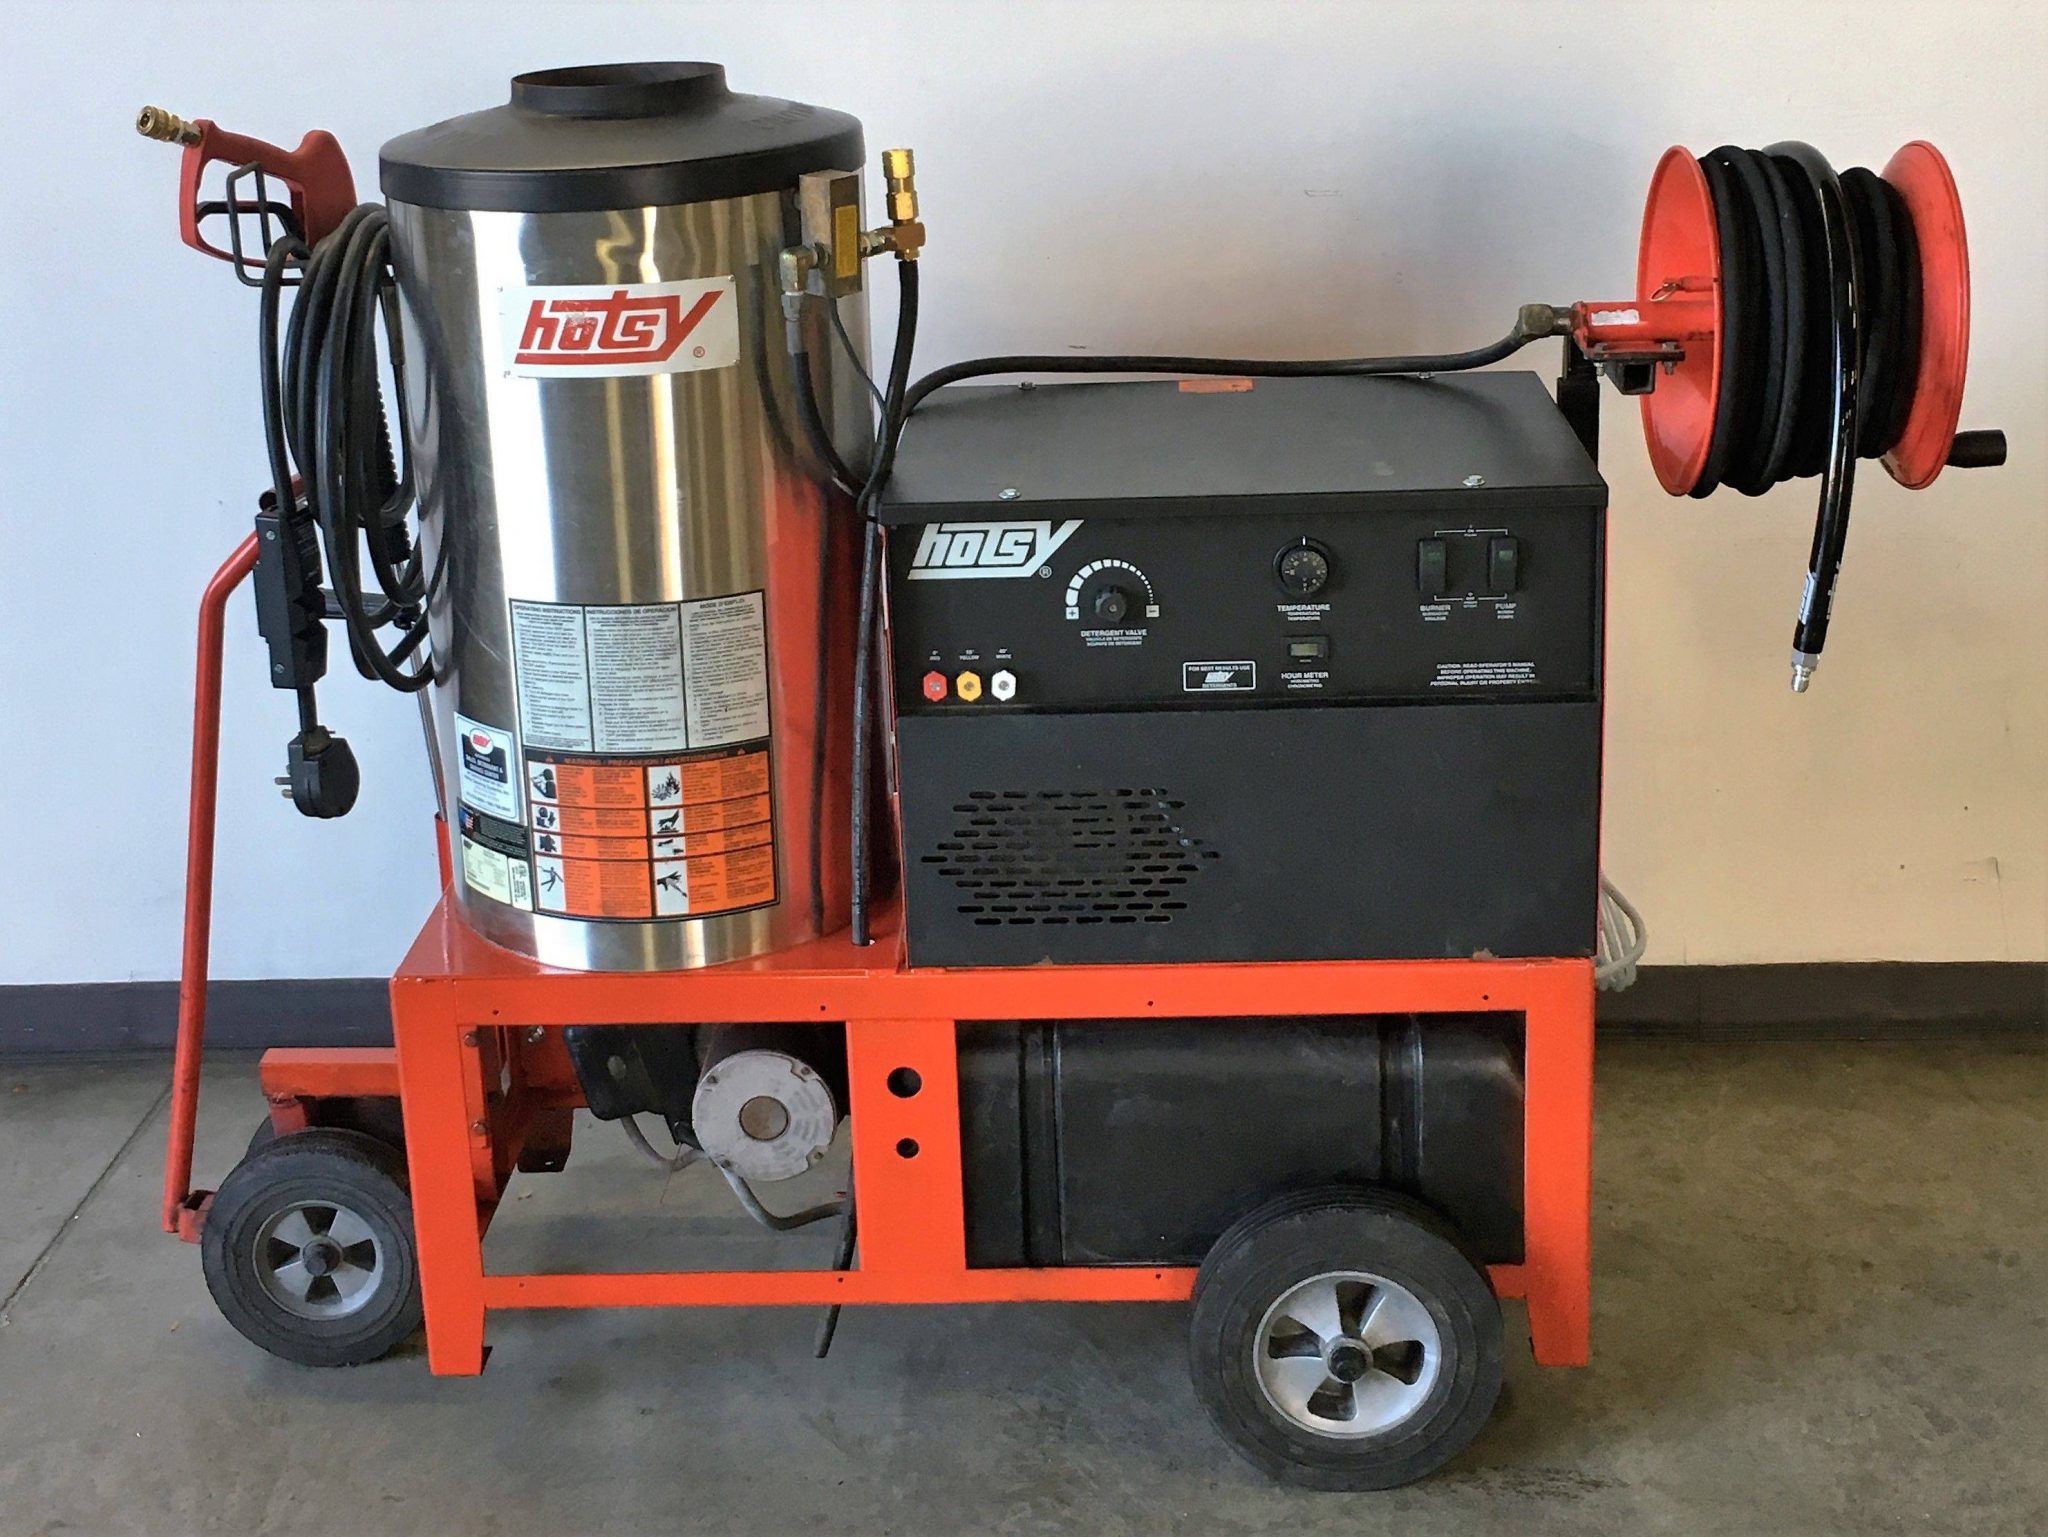 A 2 In 1 Pressure Washer With Hot Water Is a Must-Have For Commercial Use